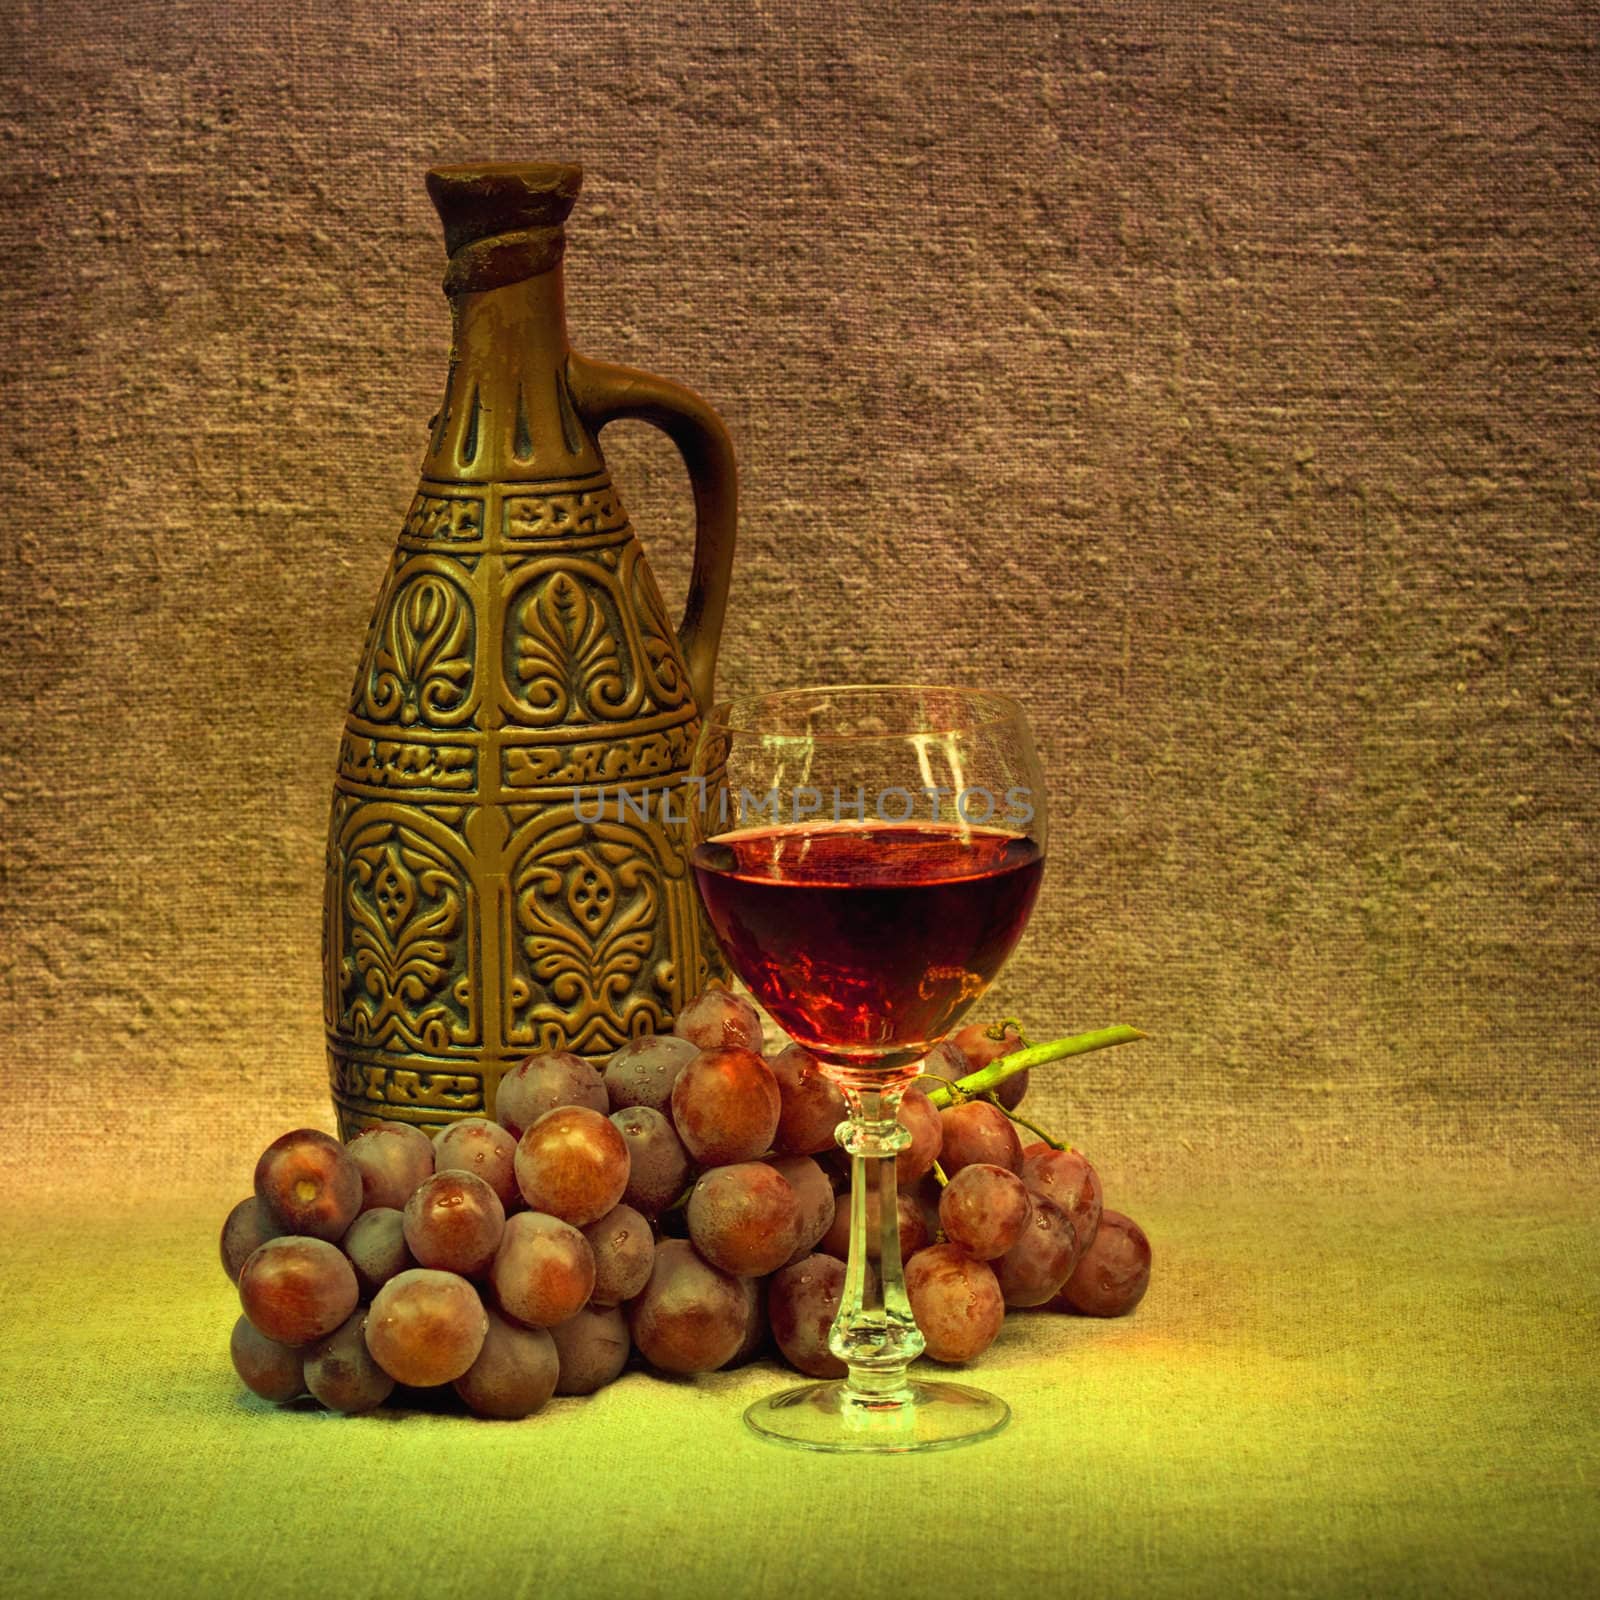 Dark Still Life - clay bottle, glass and grapes by pzaxe